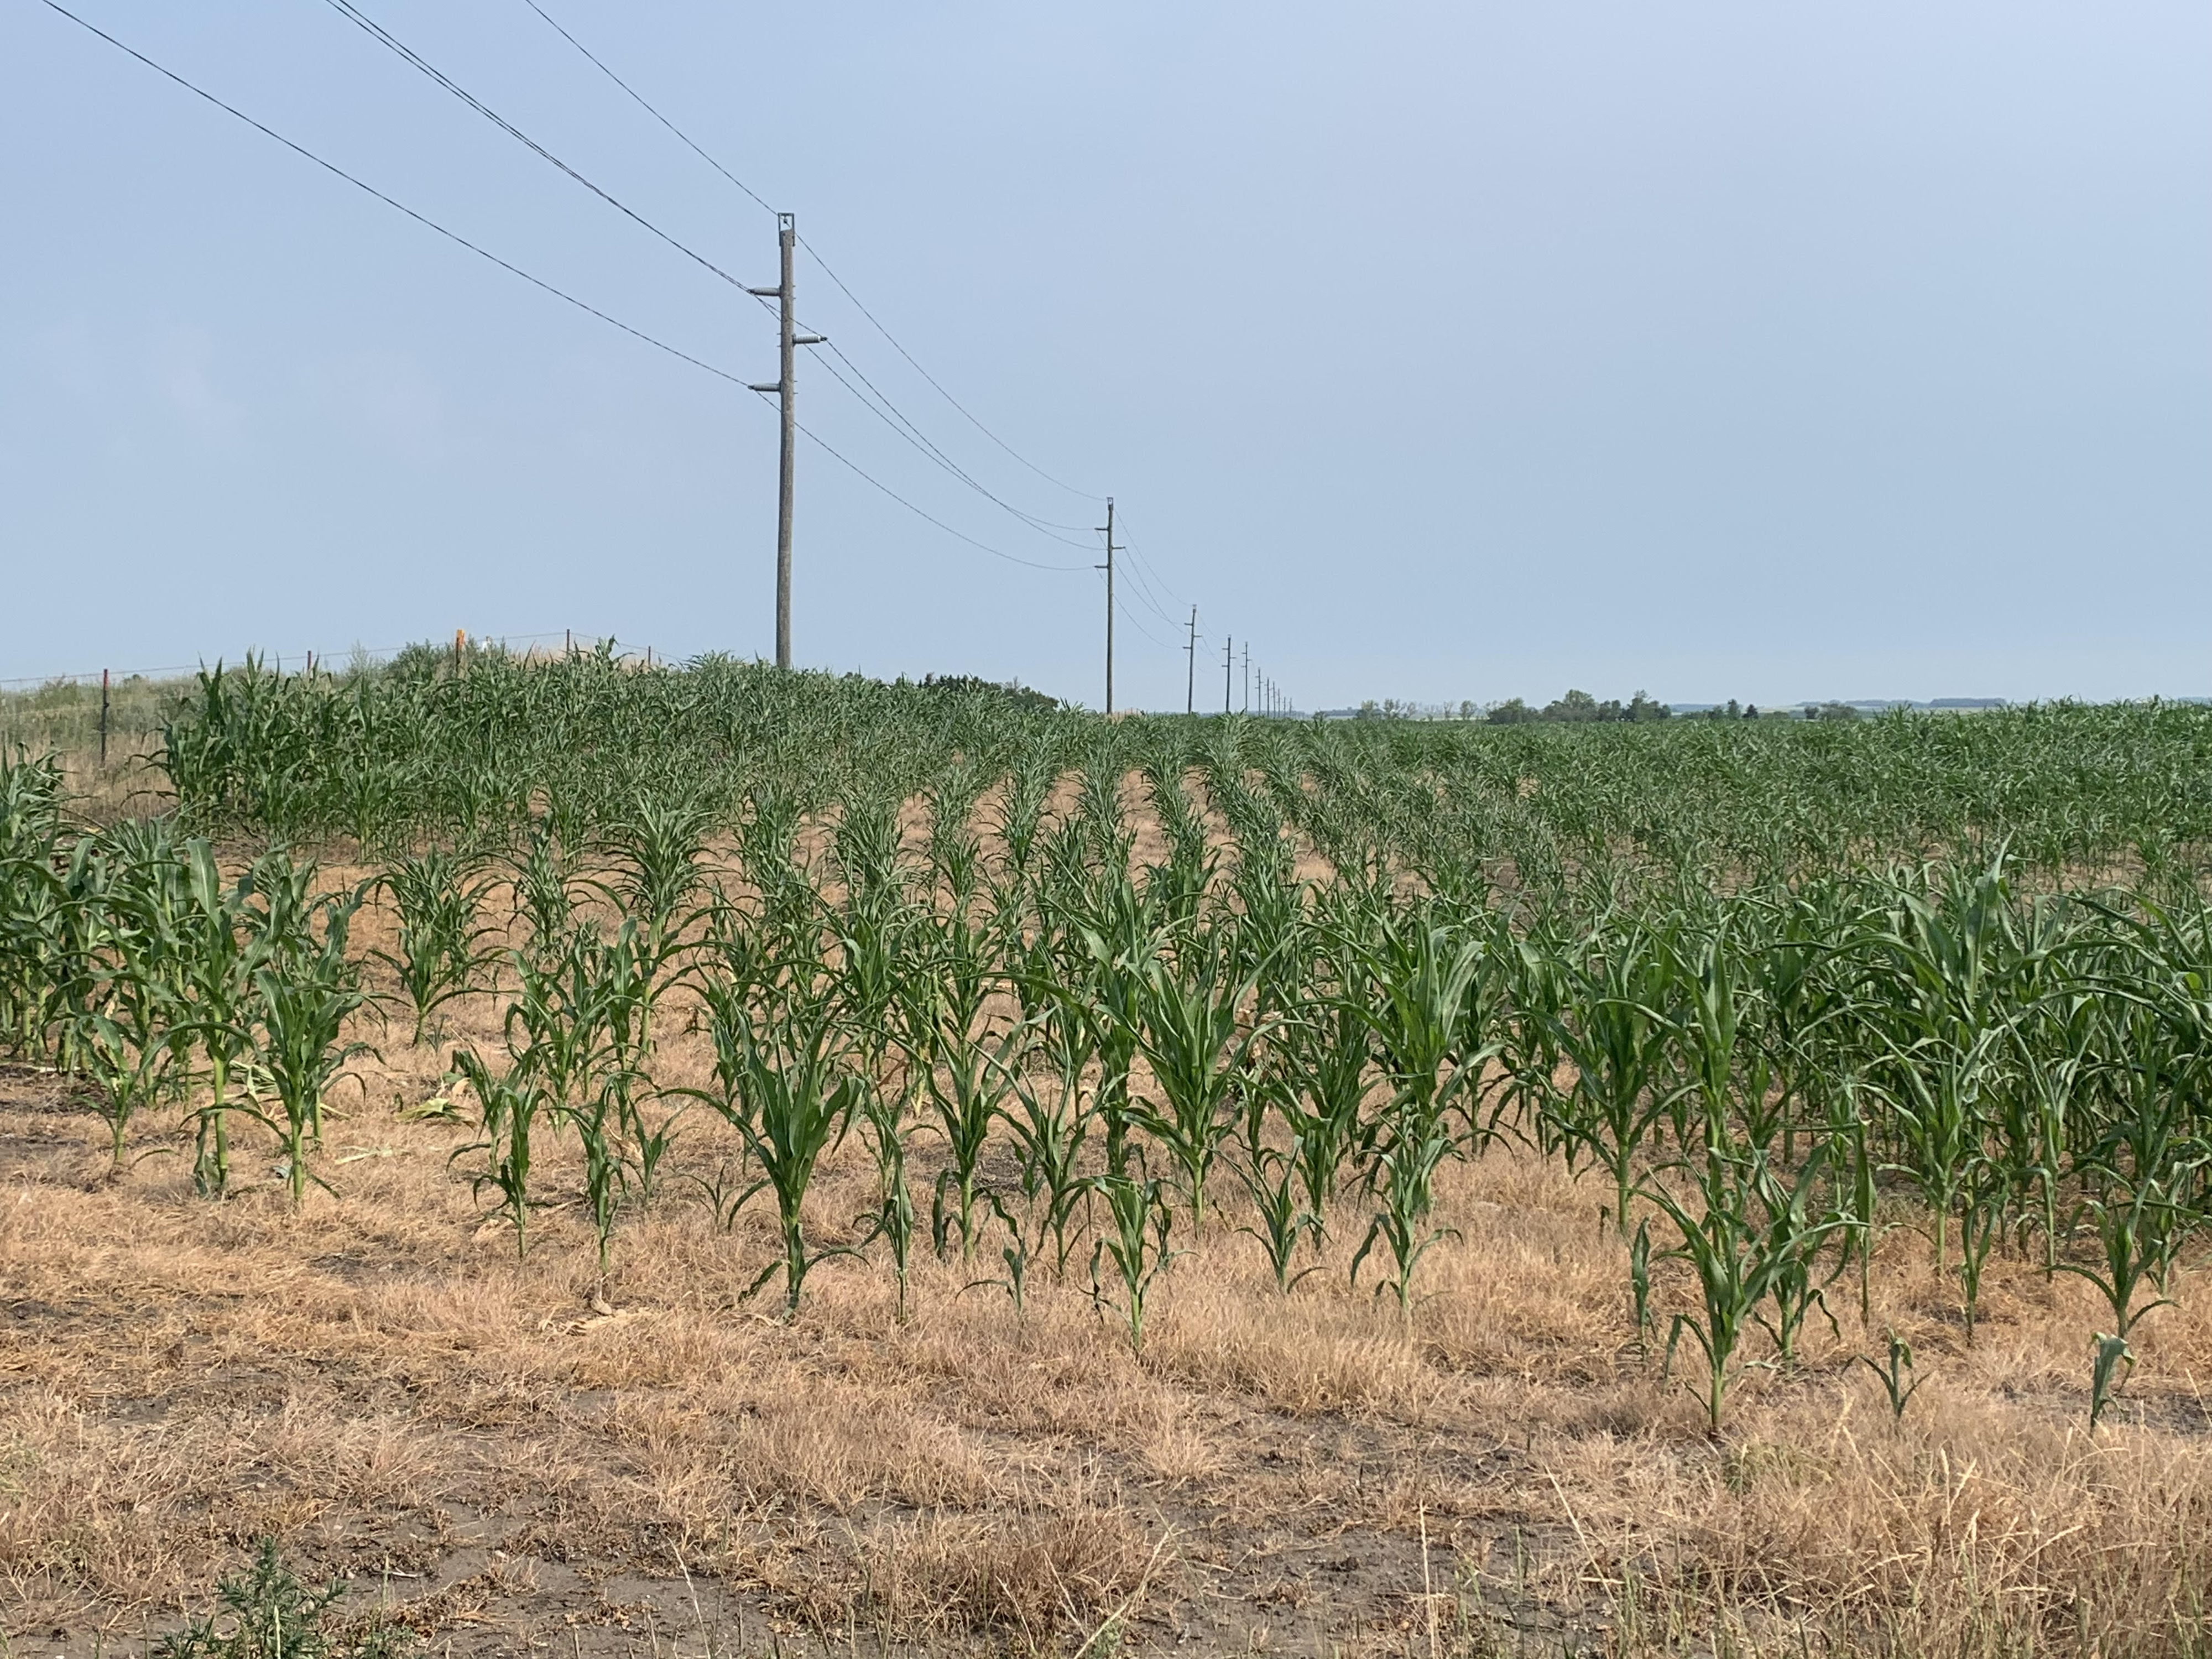 Afternoon Ag News, August 6, 2021: SDSU Extension to host Drought Hour webinars in August